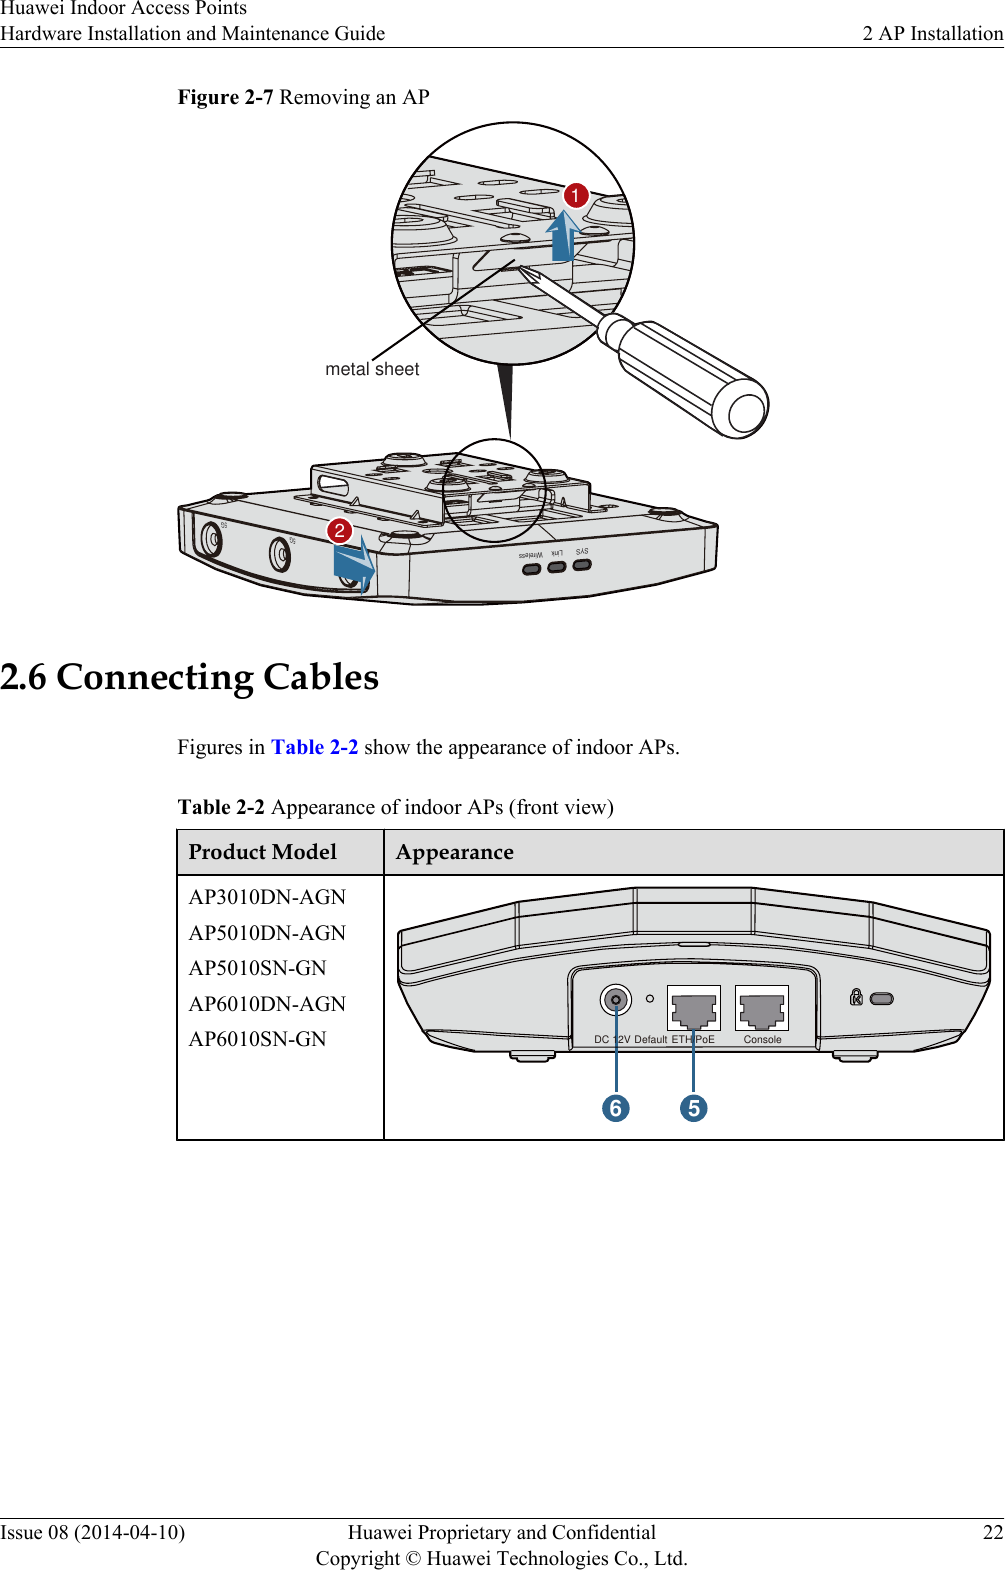 Figure 2-7 Removing an AP5G5G5GWirelessLinkSYSmetal sheet212.6 Connecting CablesFigures in Table 2-2 show the appearance of indoor APs.Table 2-2 Appearance of indoor APs (front view)Product Model AppearanceAP3010DN-AGNAP5010DN-AGNAP5010SN-GNAP6010DN-AGNAP6010SN-GN6 5ConsoleETH/PoEDefaultDC 12VHuawei Indoor Access PointsHardware Installation and Maintenance Guide 2 AP InstallationIssue 08 (2014-04-10) Huawei Proprietary and ConfidentialCopyright © Huawei Technologies Co., Ltd.22